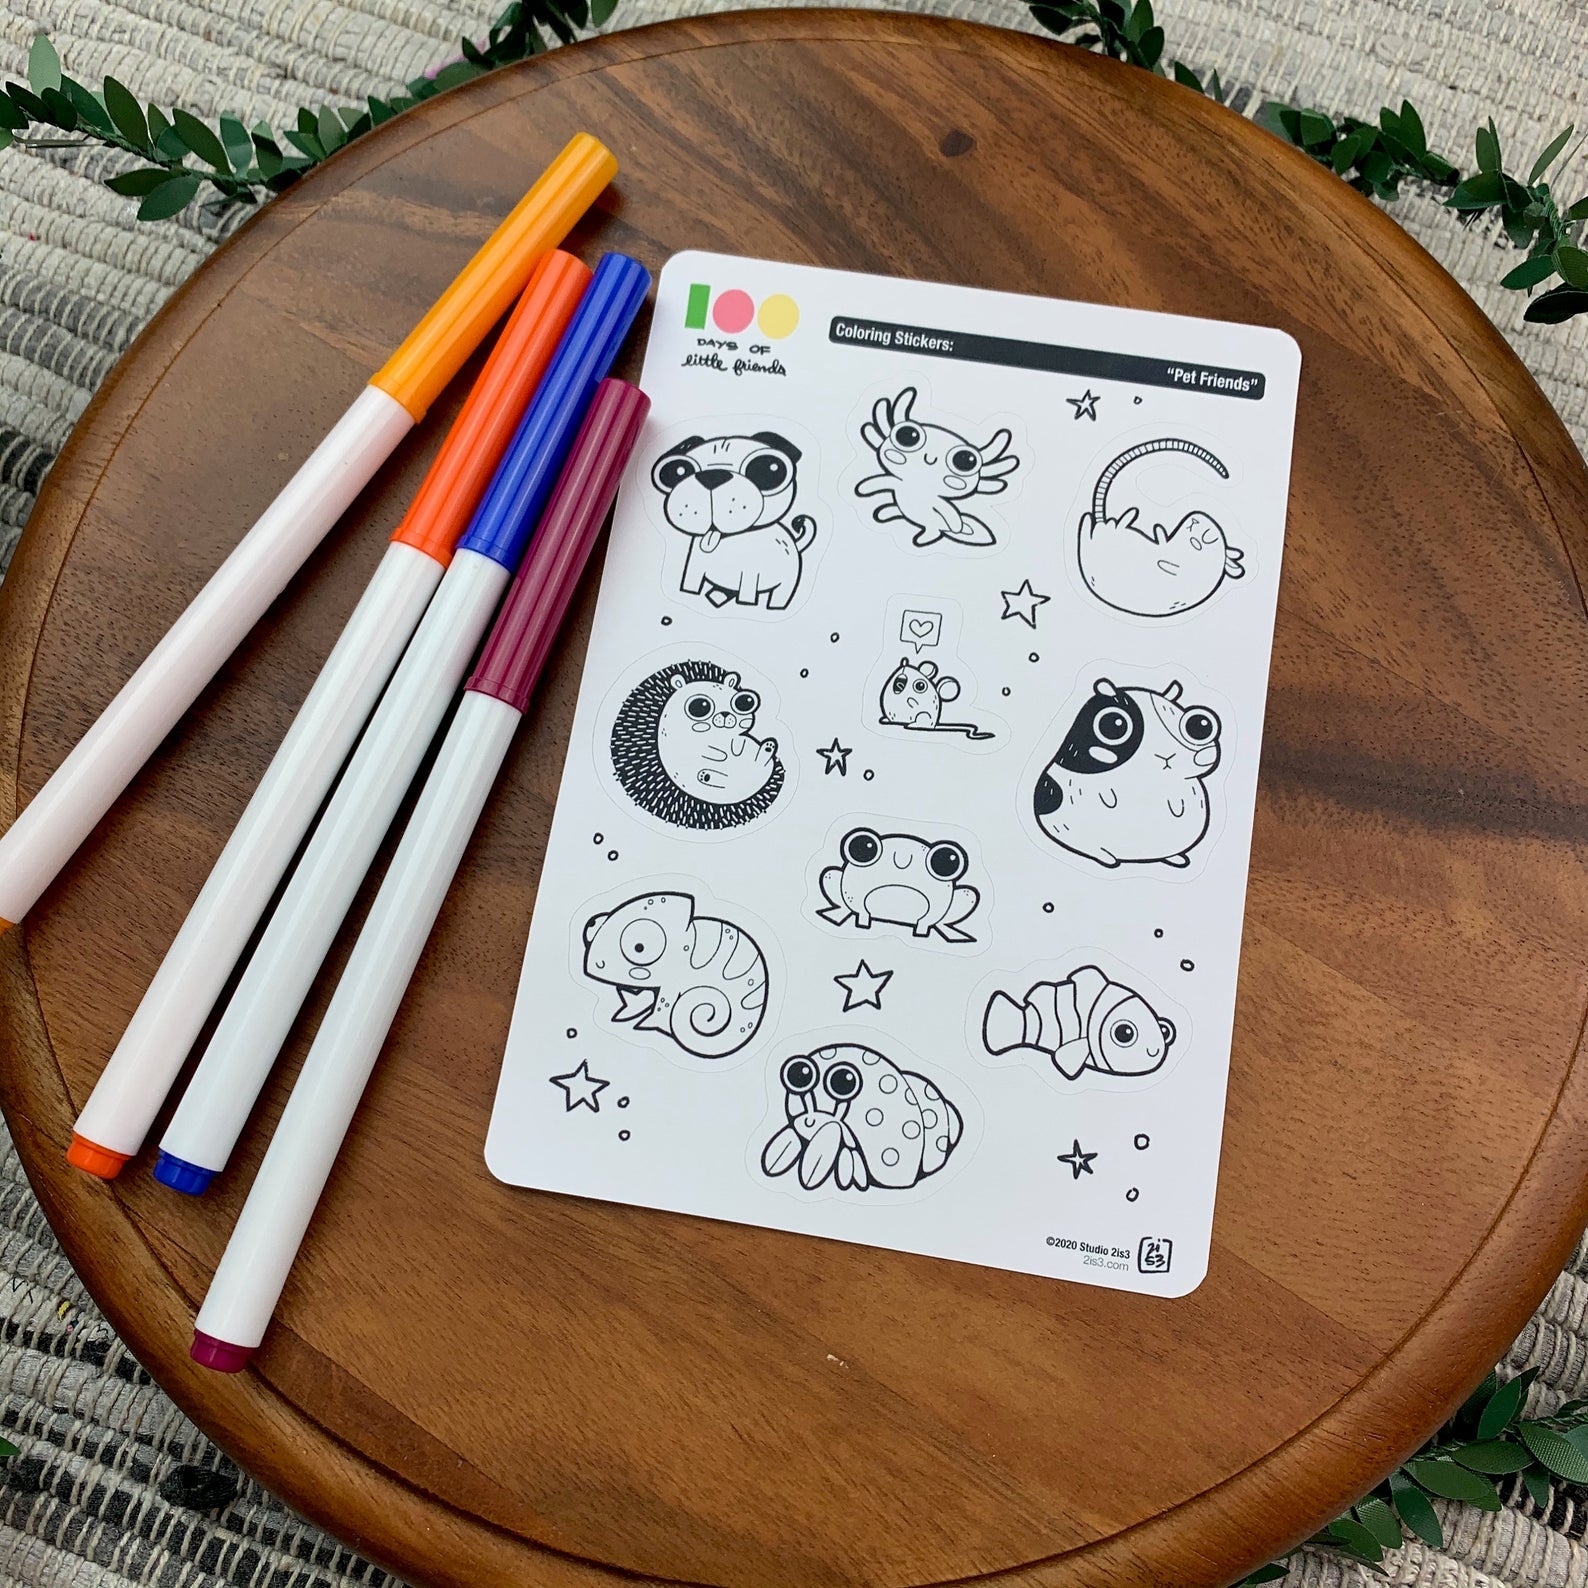 Markers and a sticker sheet with 10 little animal stickers on it. A Pug, Salamander, Rat, Mouse, Hedgehog, Guinea Pig, Frog, Chameleon, Hermit Crab, and Clown Fish.